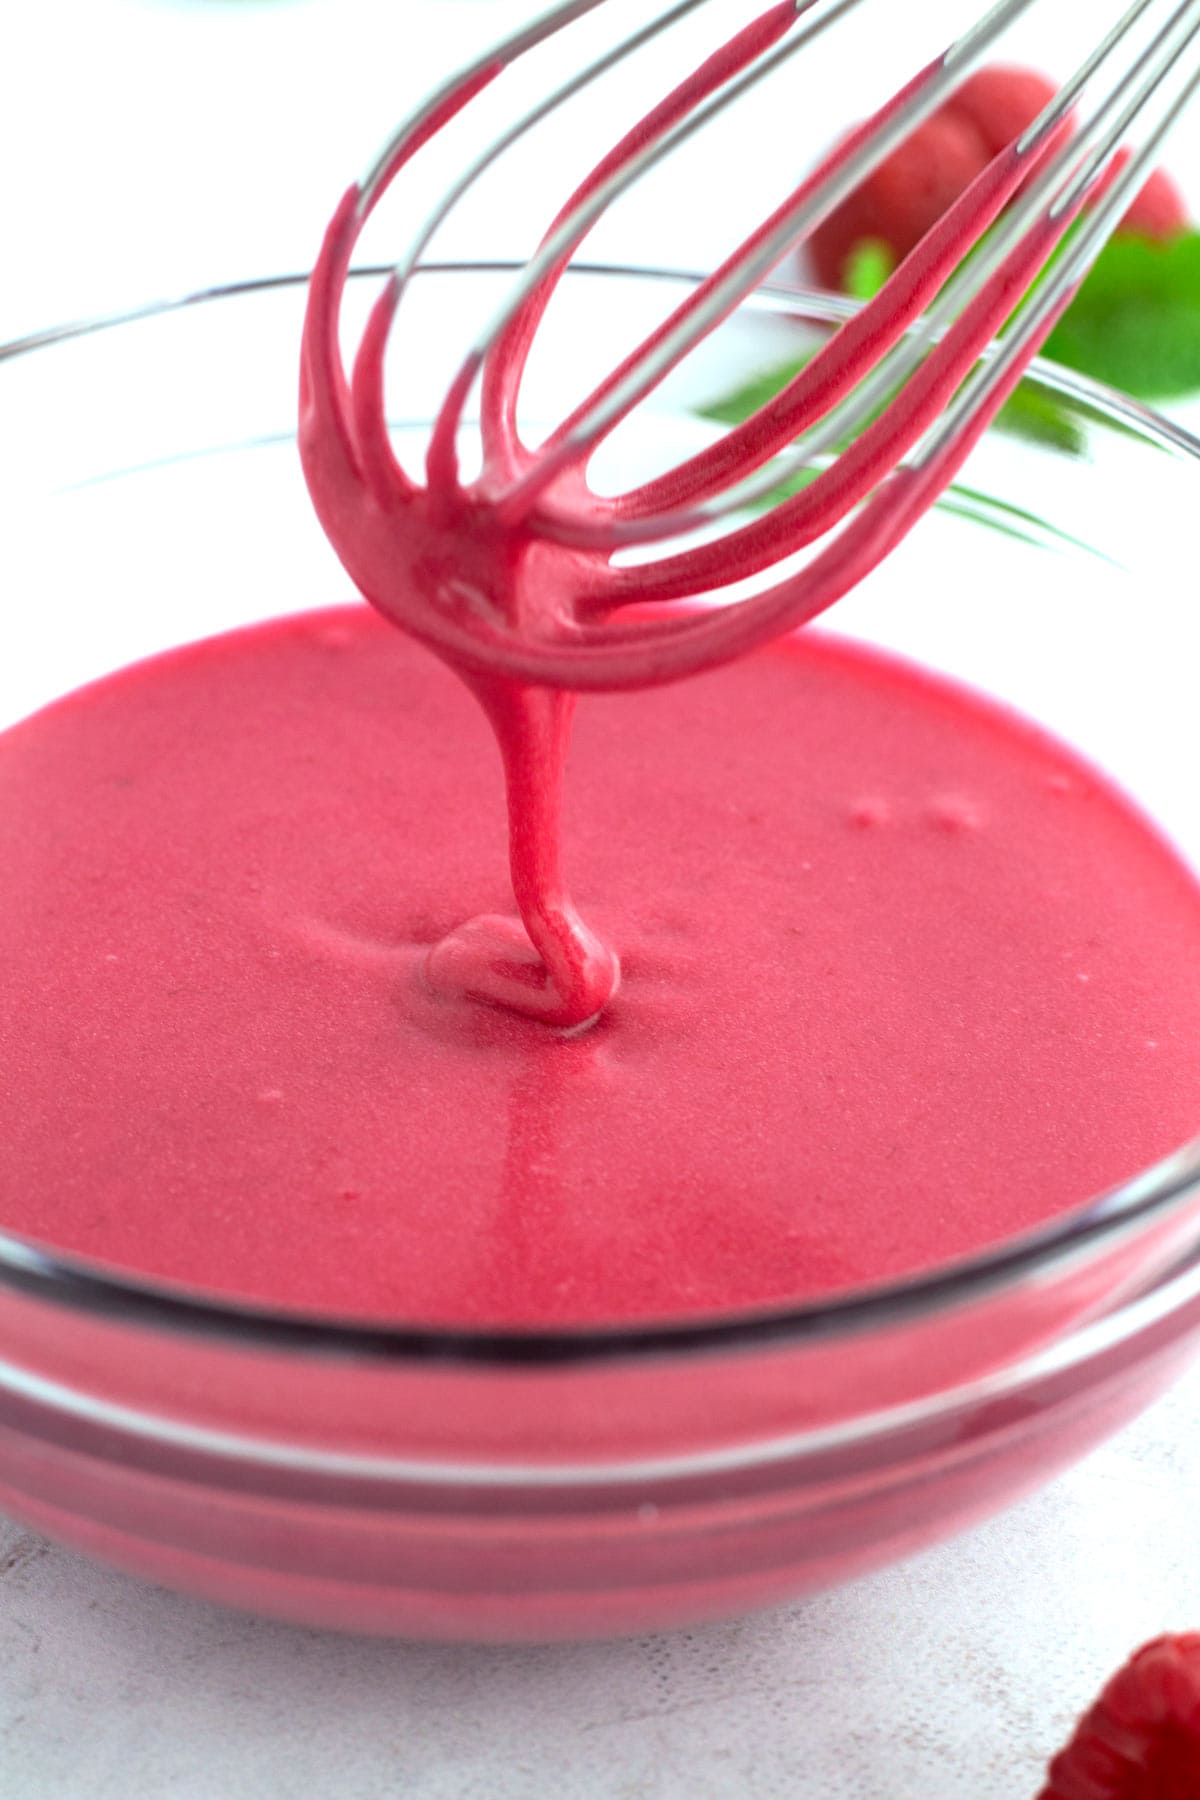 Whisking together the raspberry glaze ingredients.